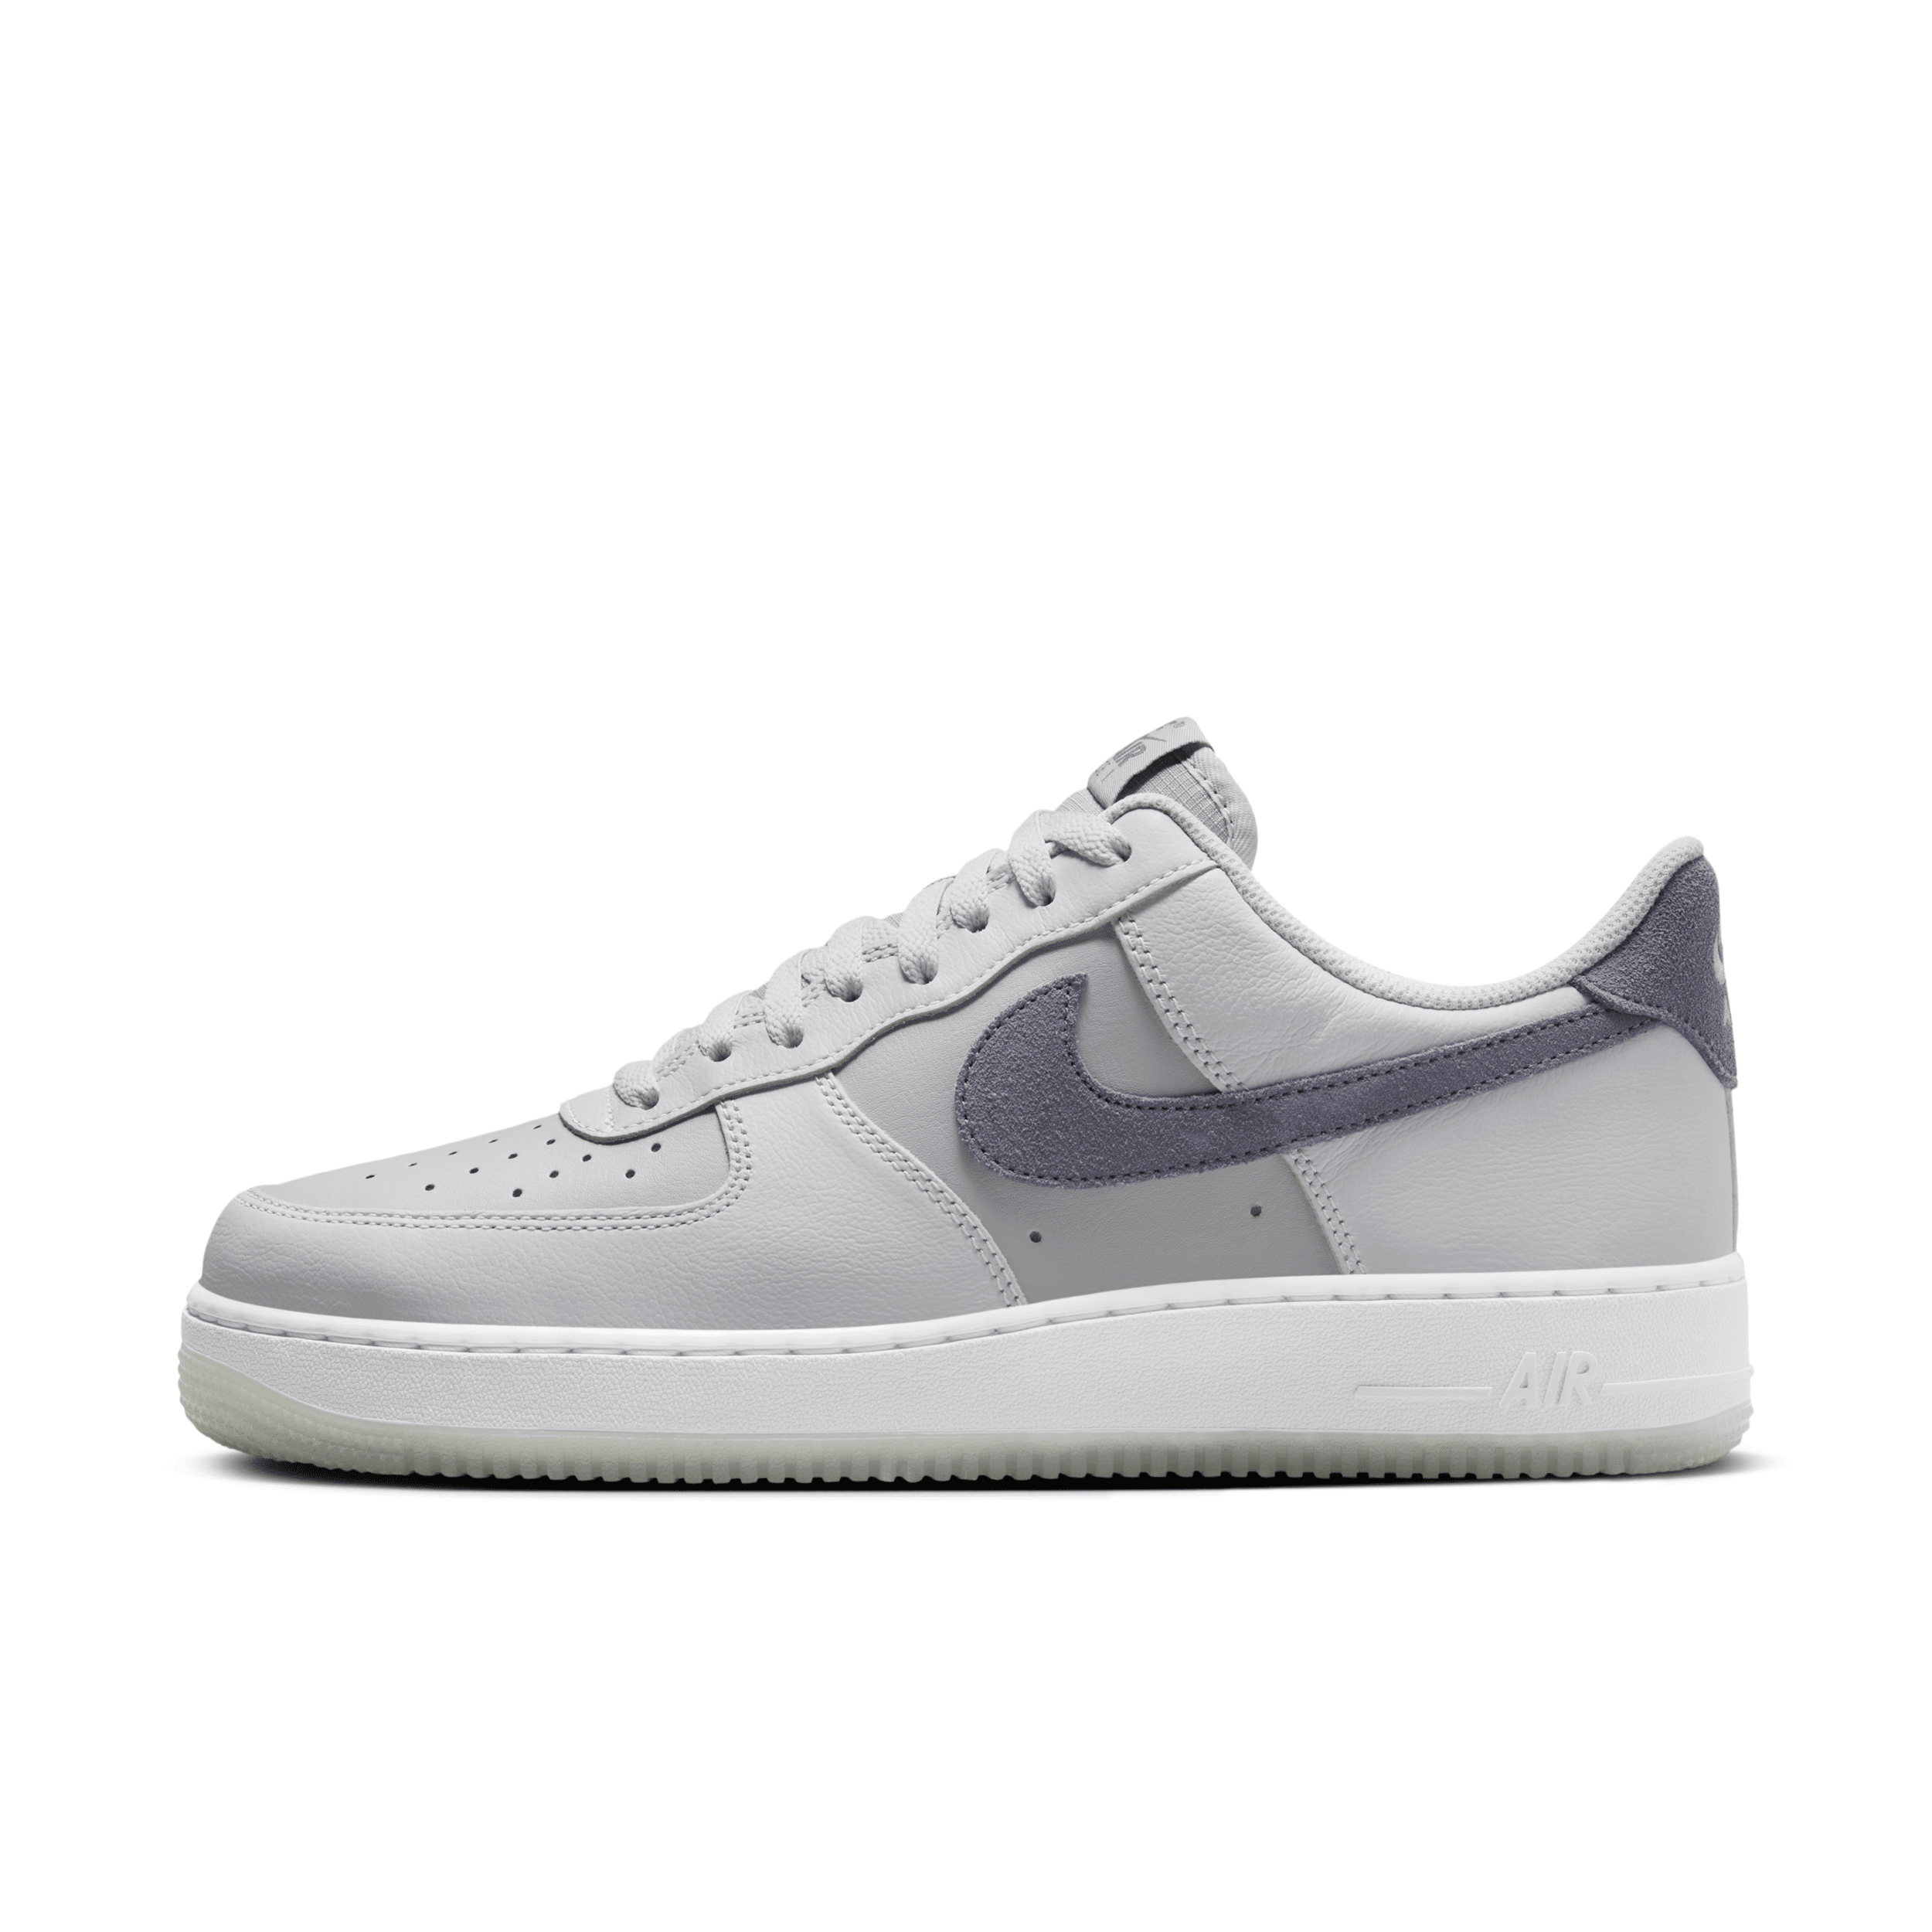 NIKE MEN'S AIR FORCE 1 '07 LV8 SHOES,1014200005